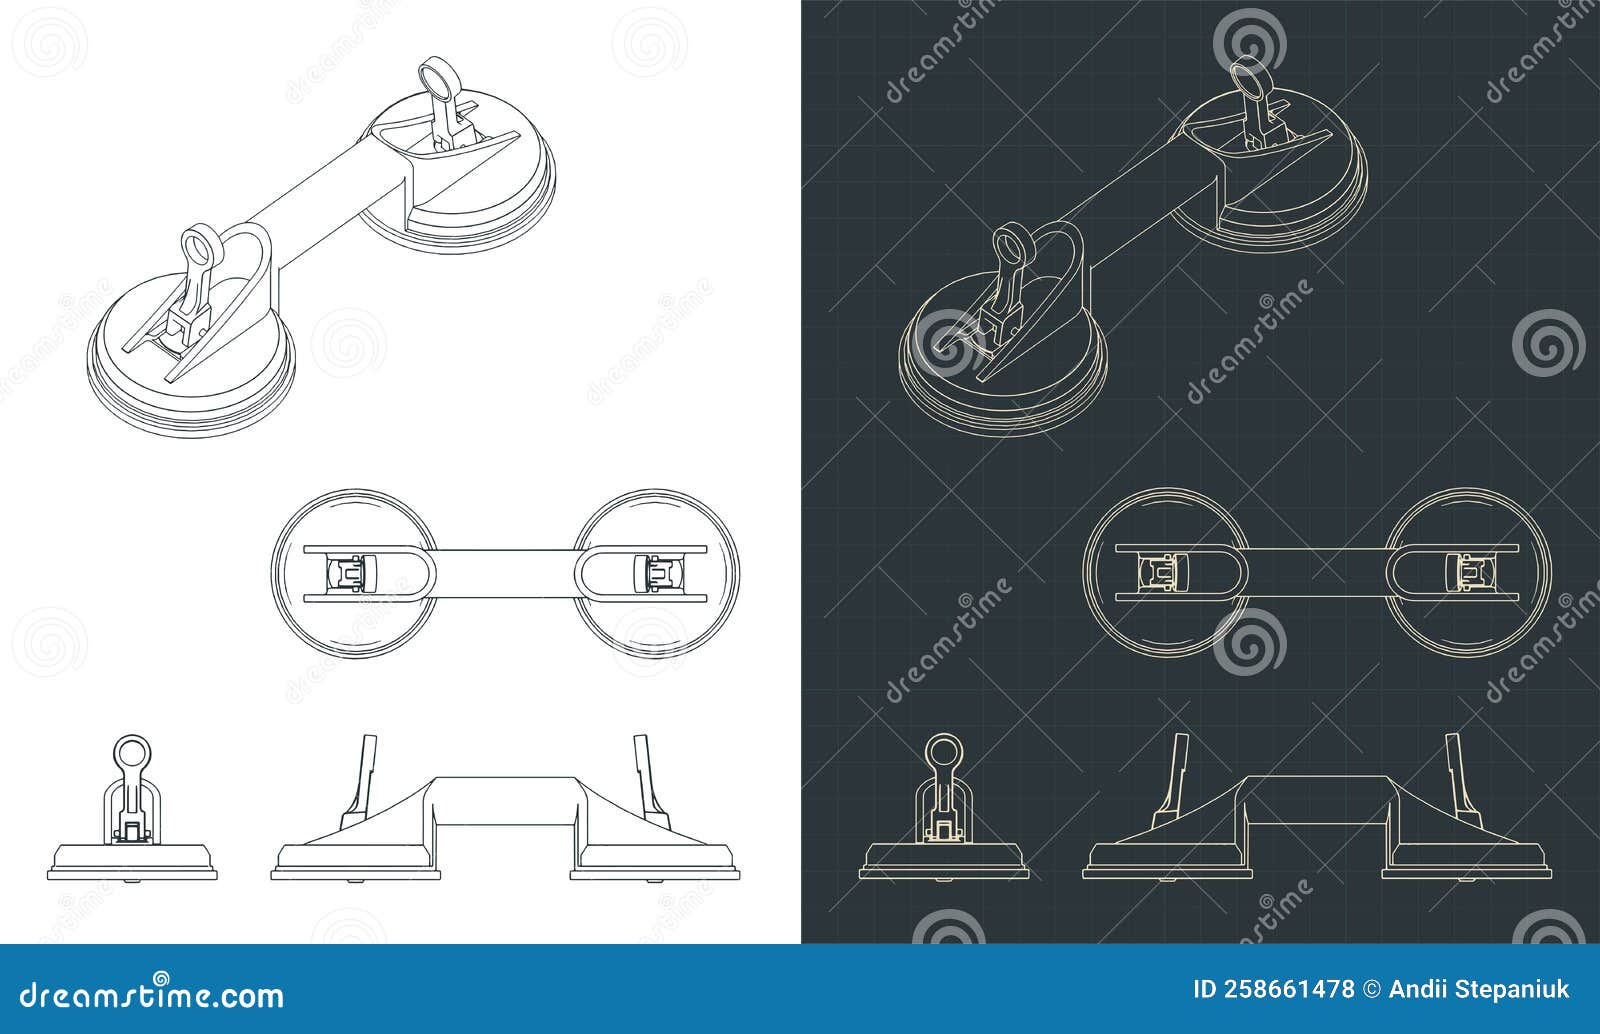 Suction cups lifter stock vector. Illustration of heavy - 258661478